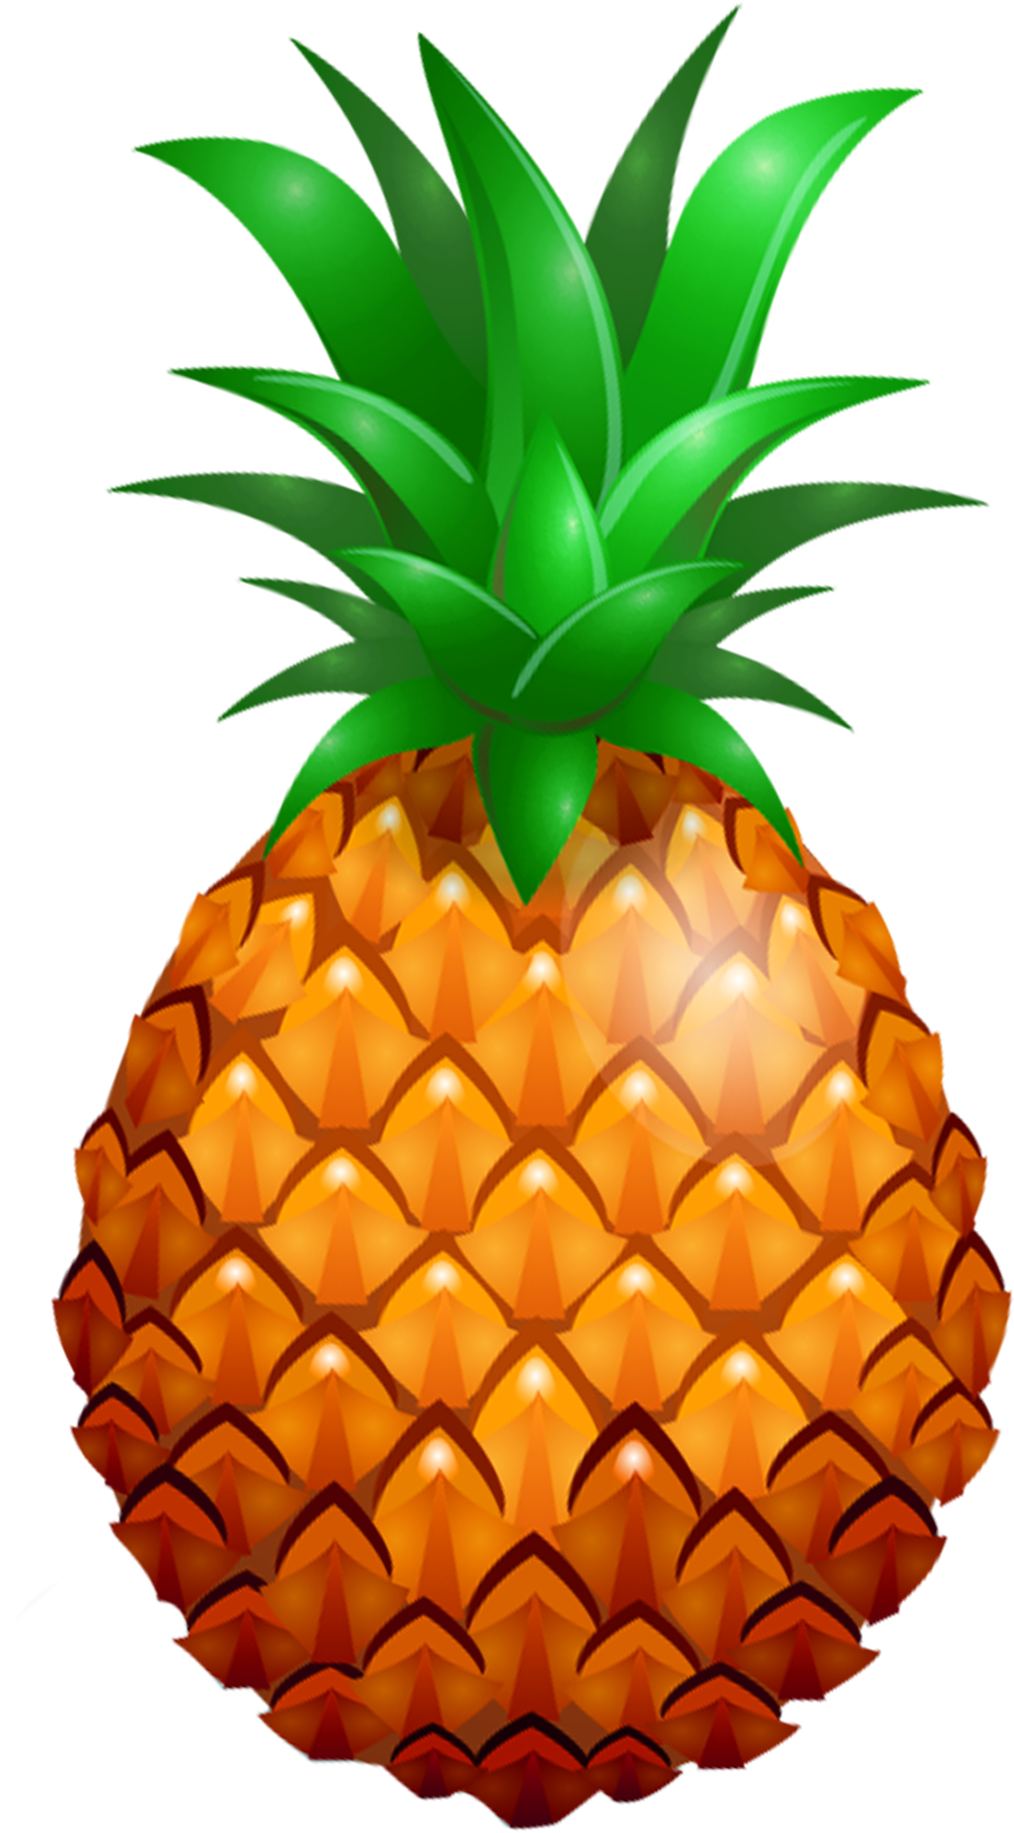 httpsdownpngToRJhpineapple png pineapple clipart png